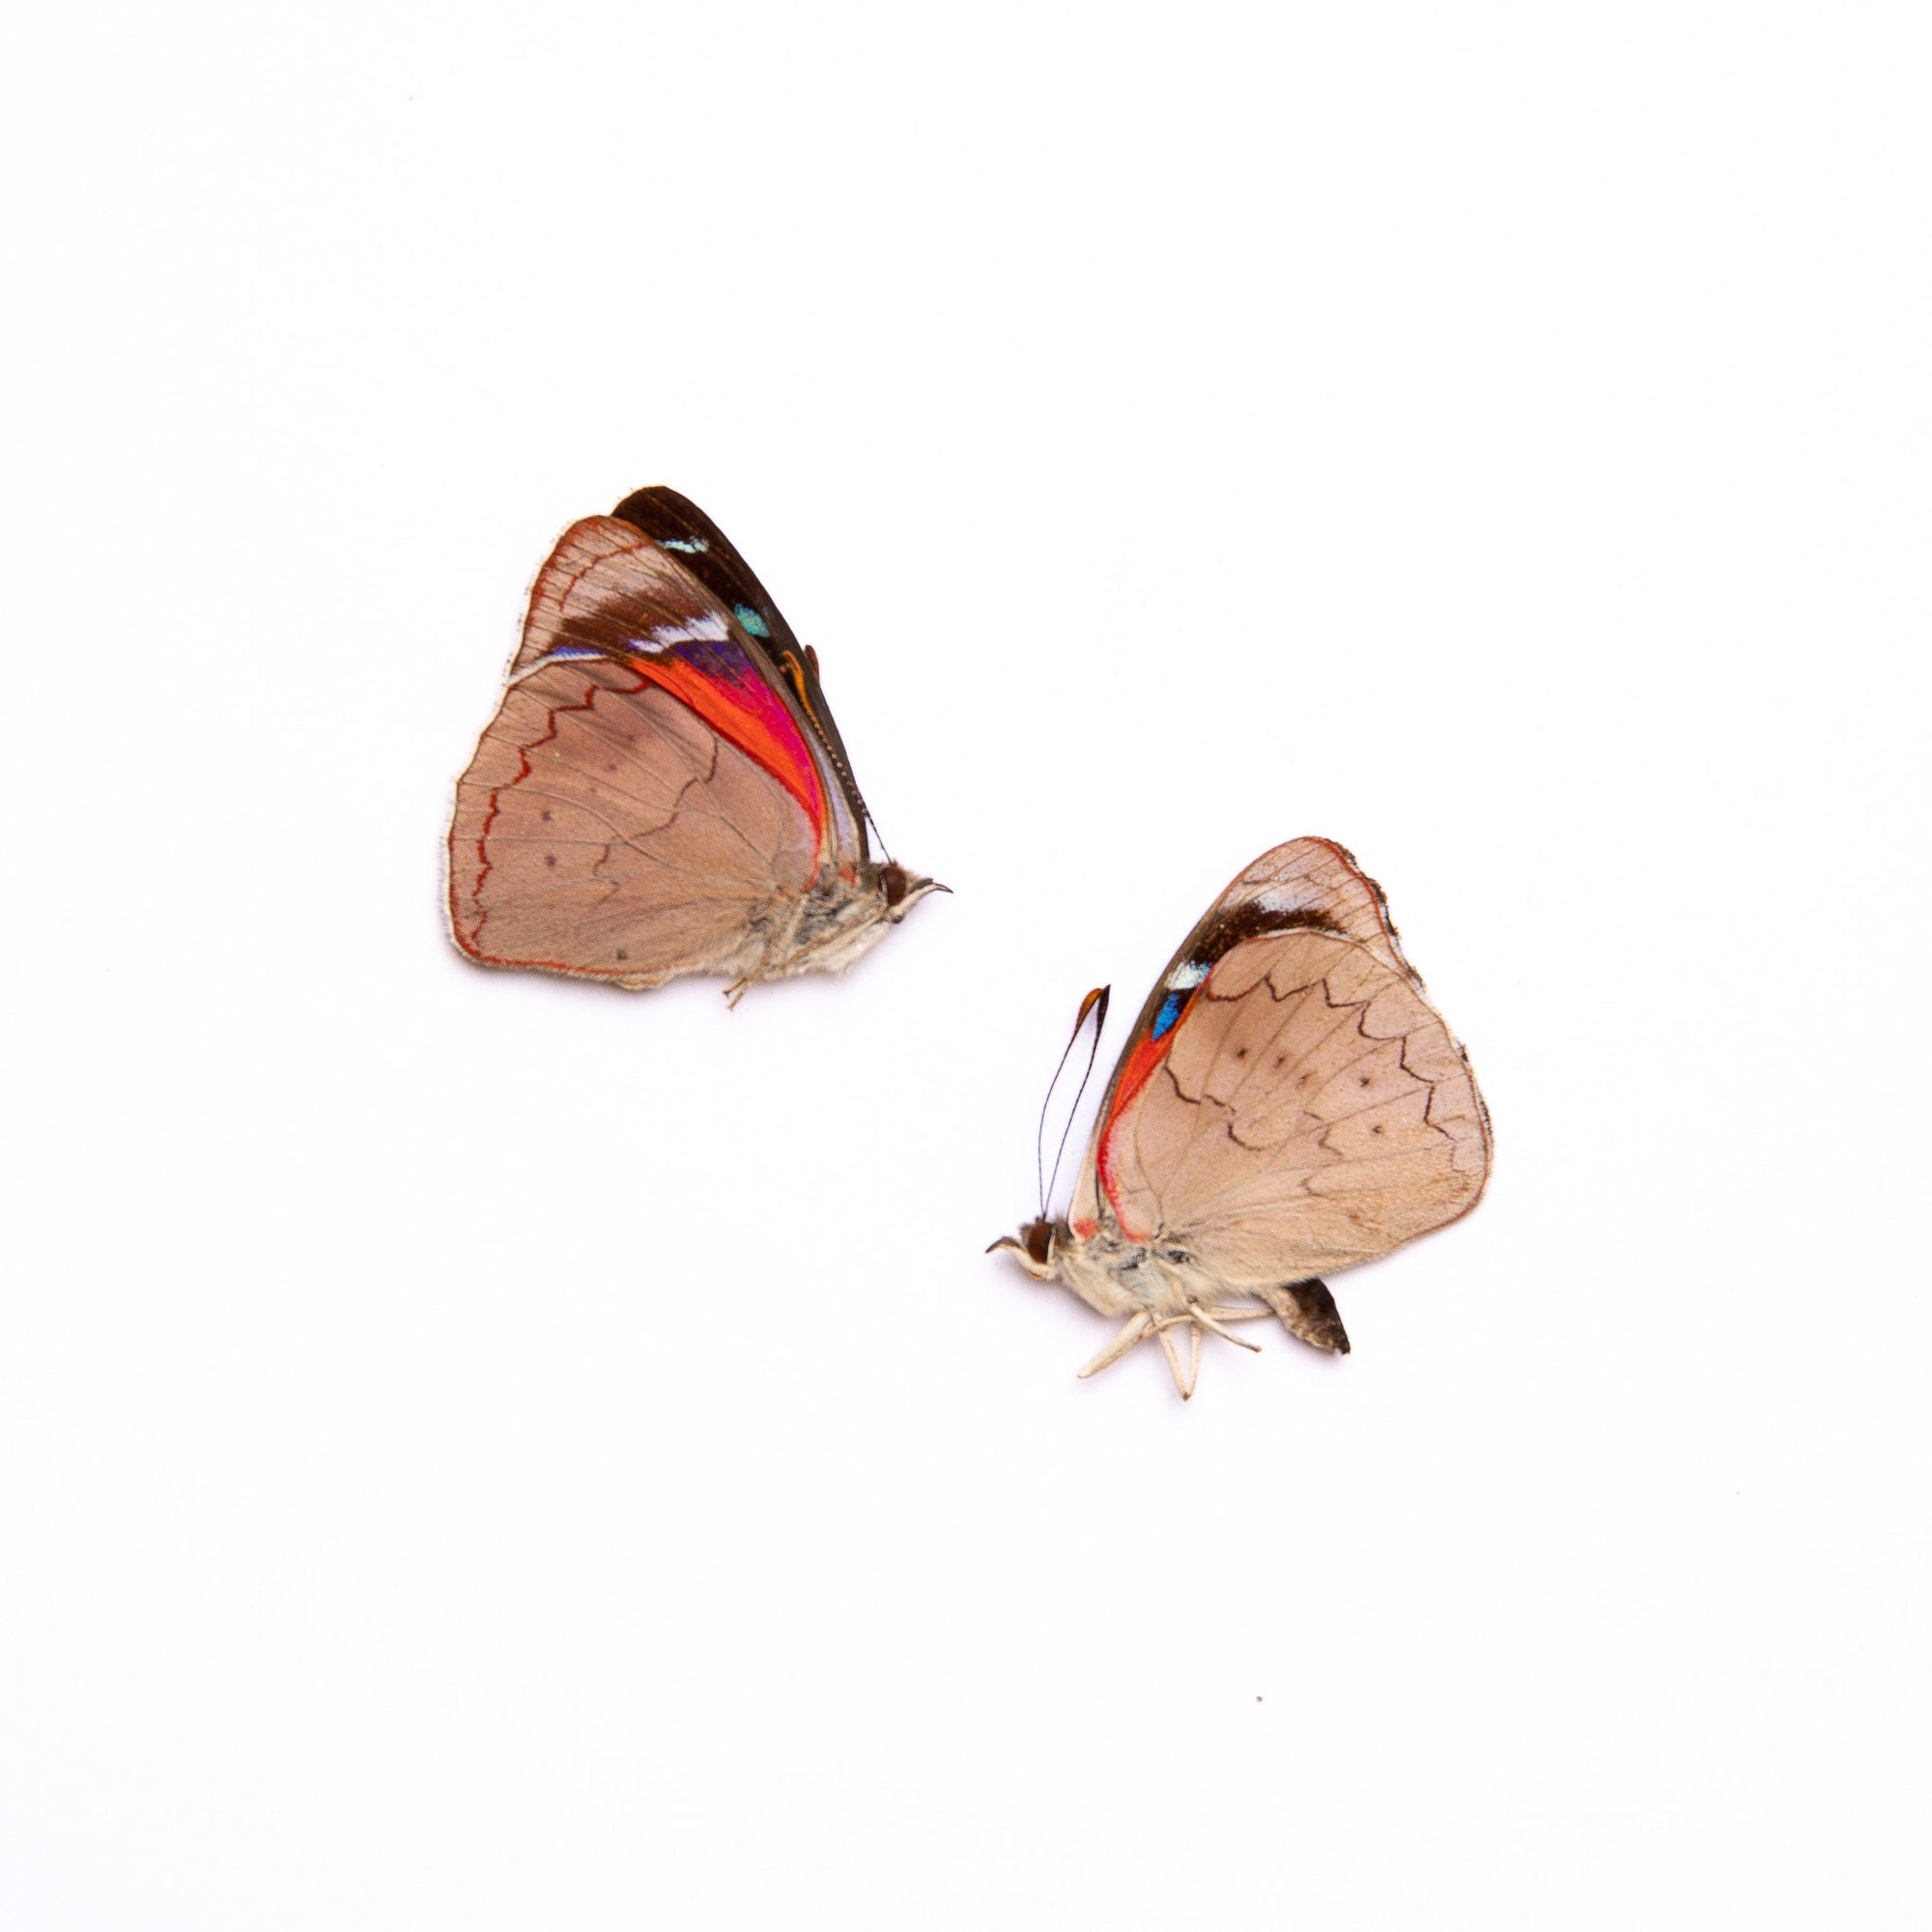 TWO (2) Perisama cecidas | A1 Real Dry-Preserved Butterflies | Unmounted Entomology Taxidermy Specimens